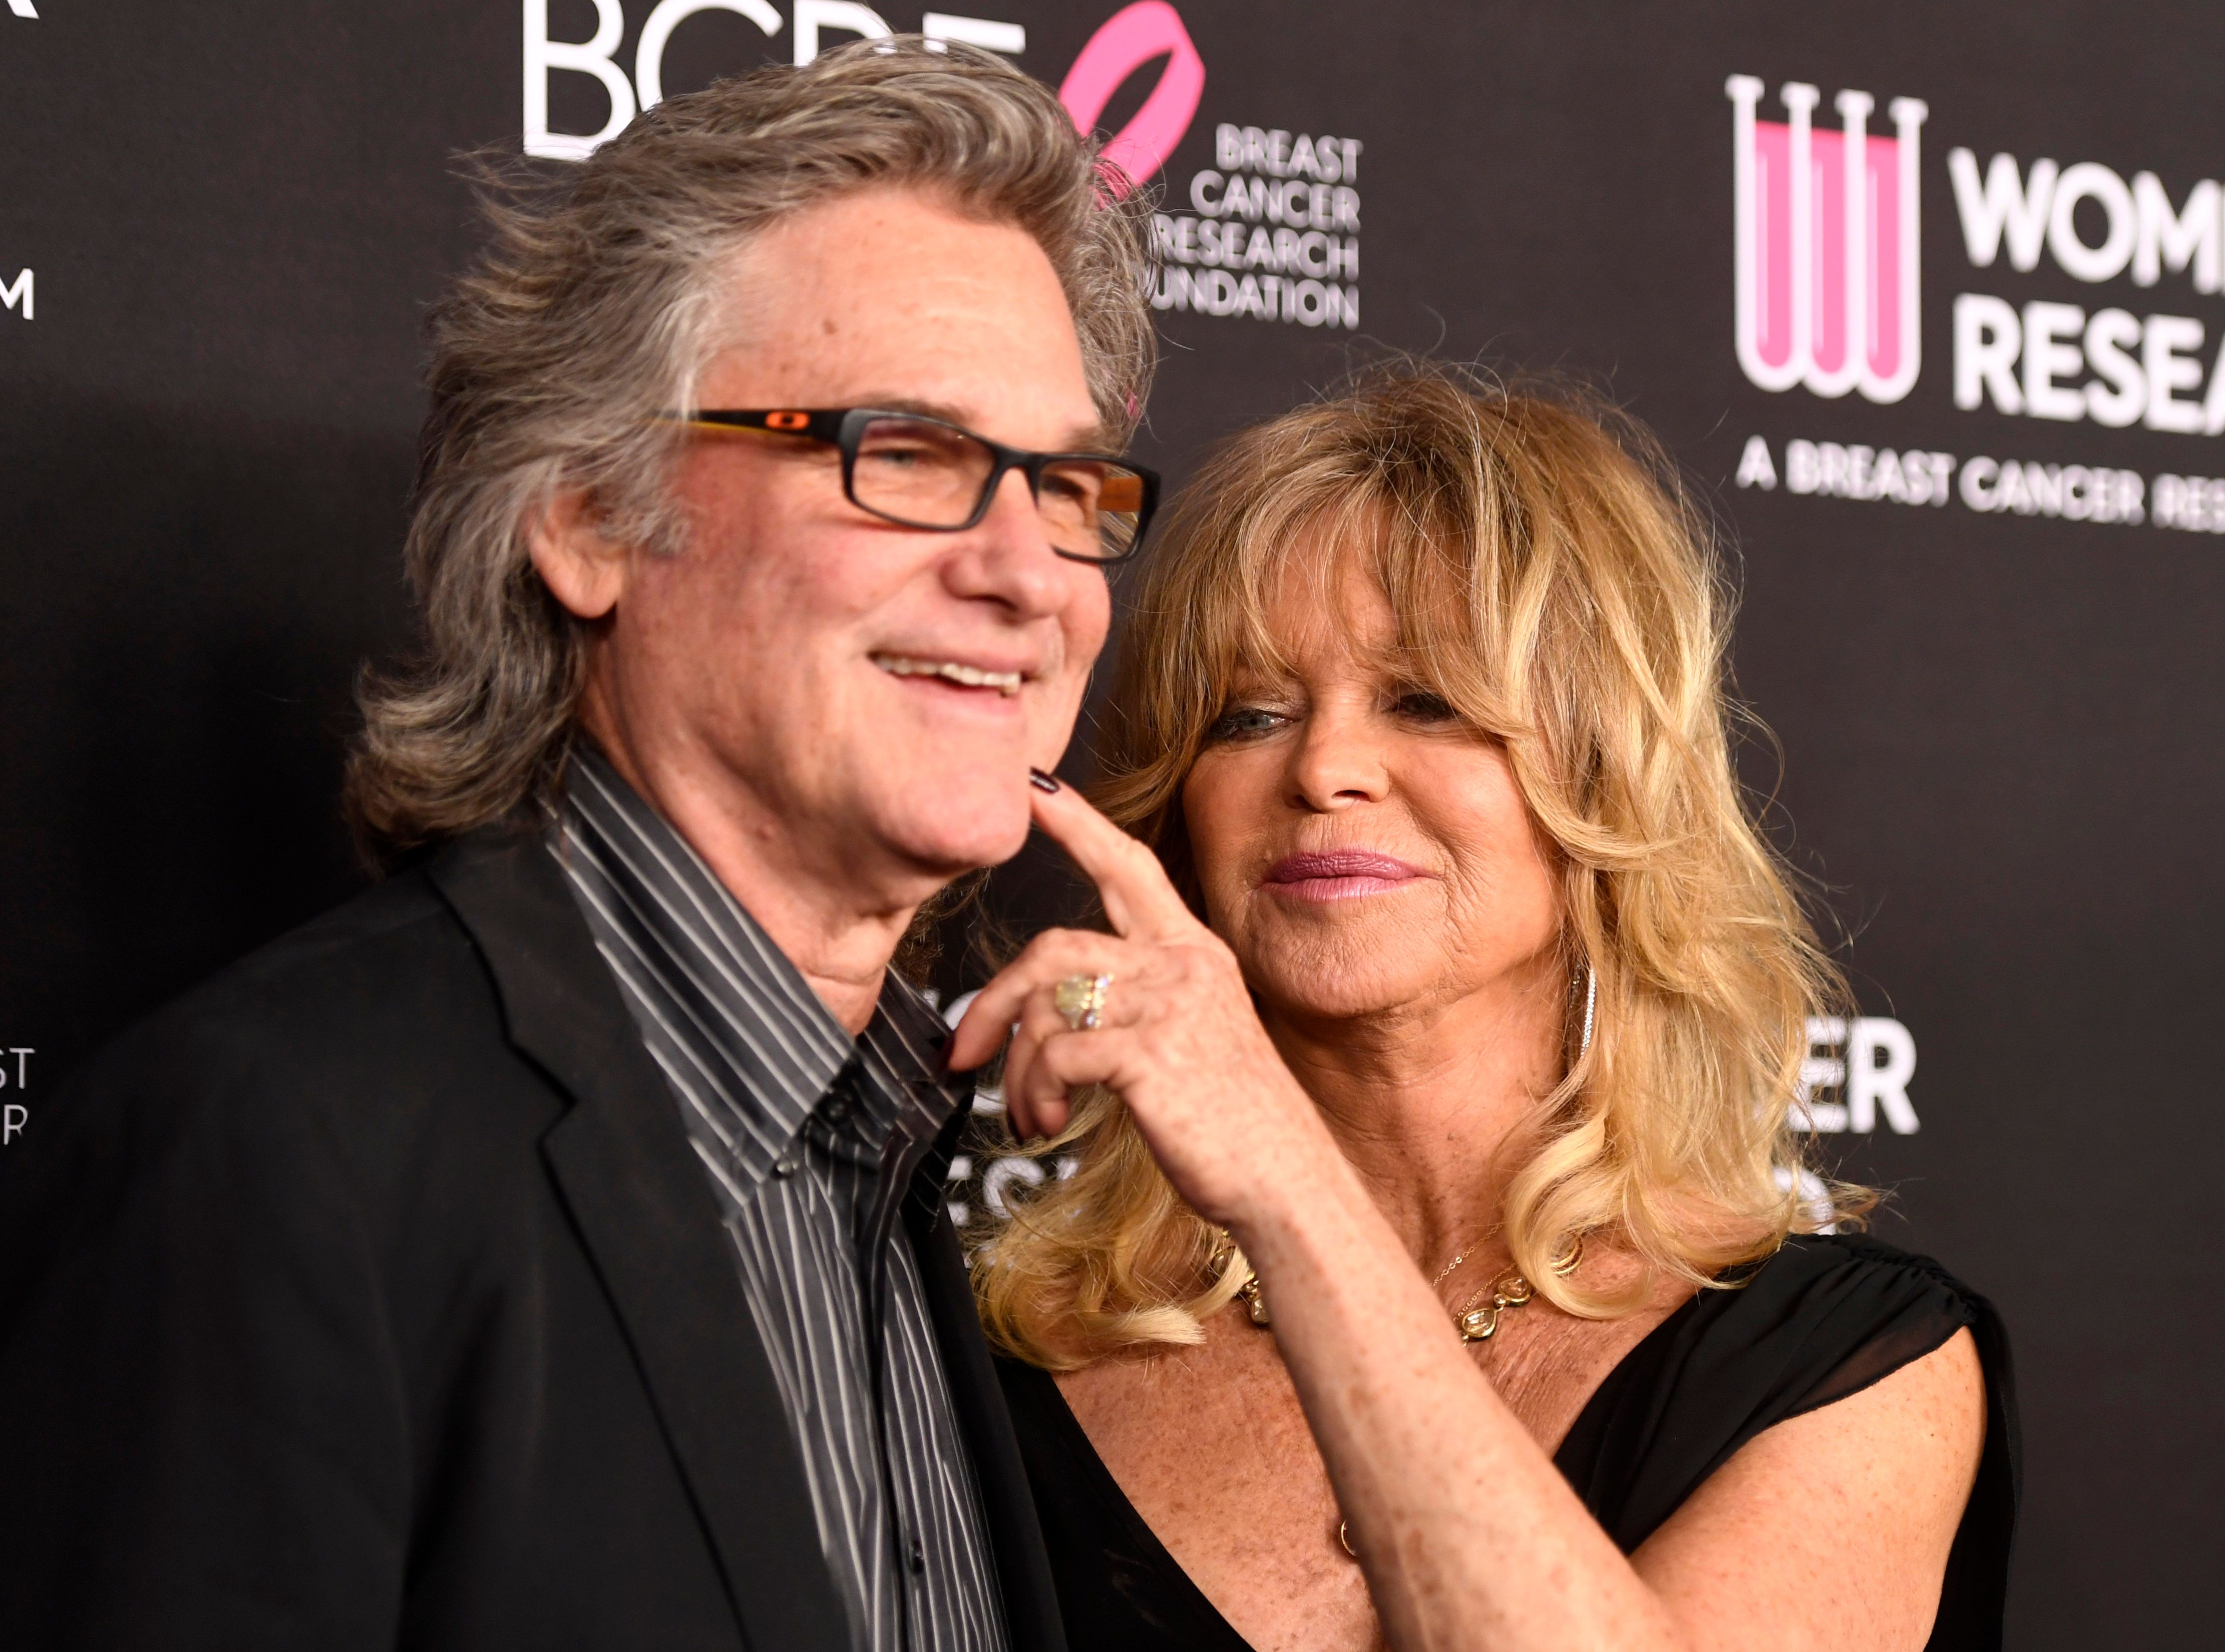 Kurt Russell and Goldie Hawn at The Women's Cancer Research Fund's An Unforgettable Evening Benefit Gala at the Beverly Wilshire Four Seasons Hotel on February 28, 2019 | Photo: Getty Images